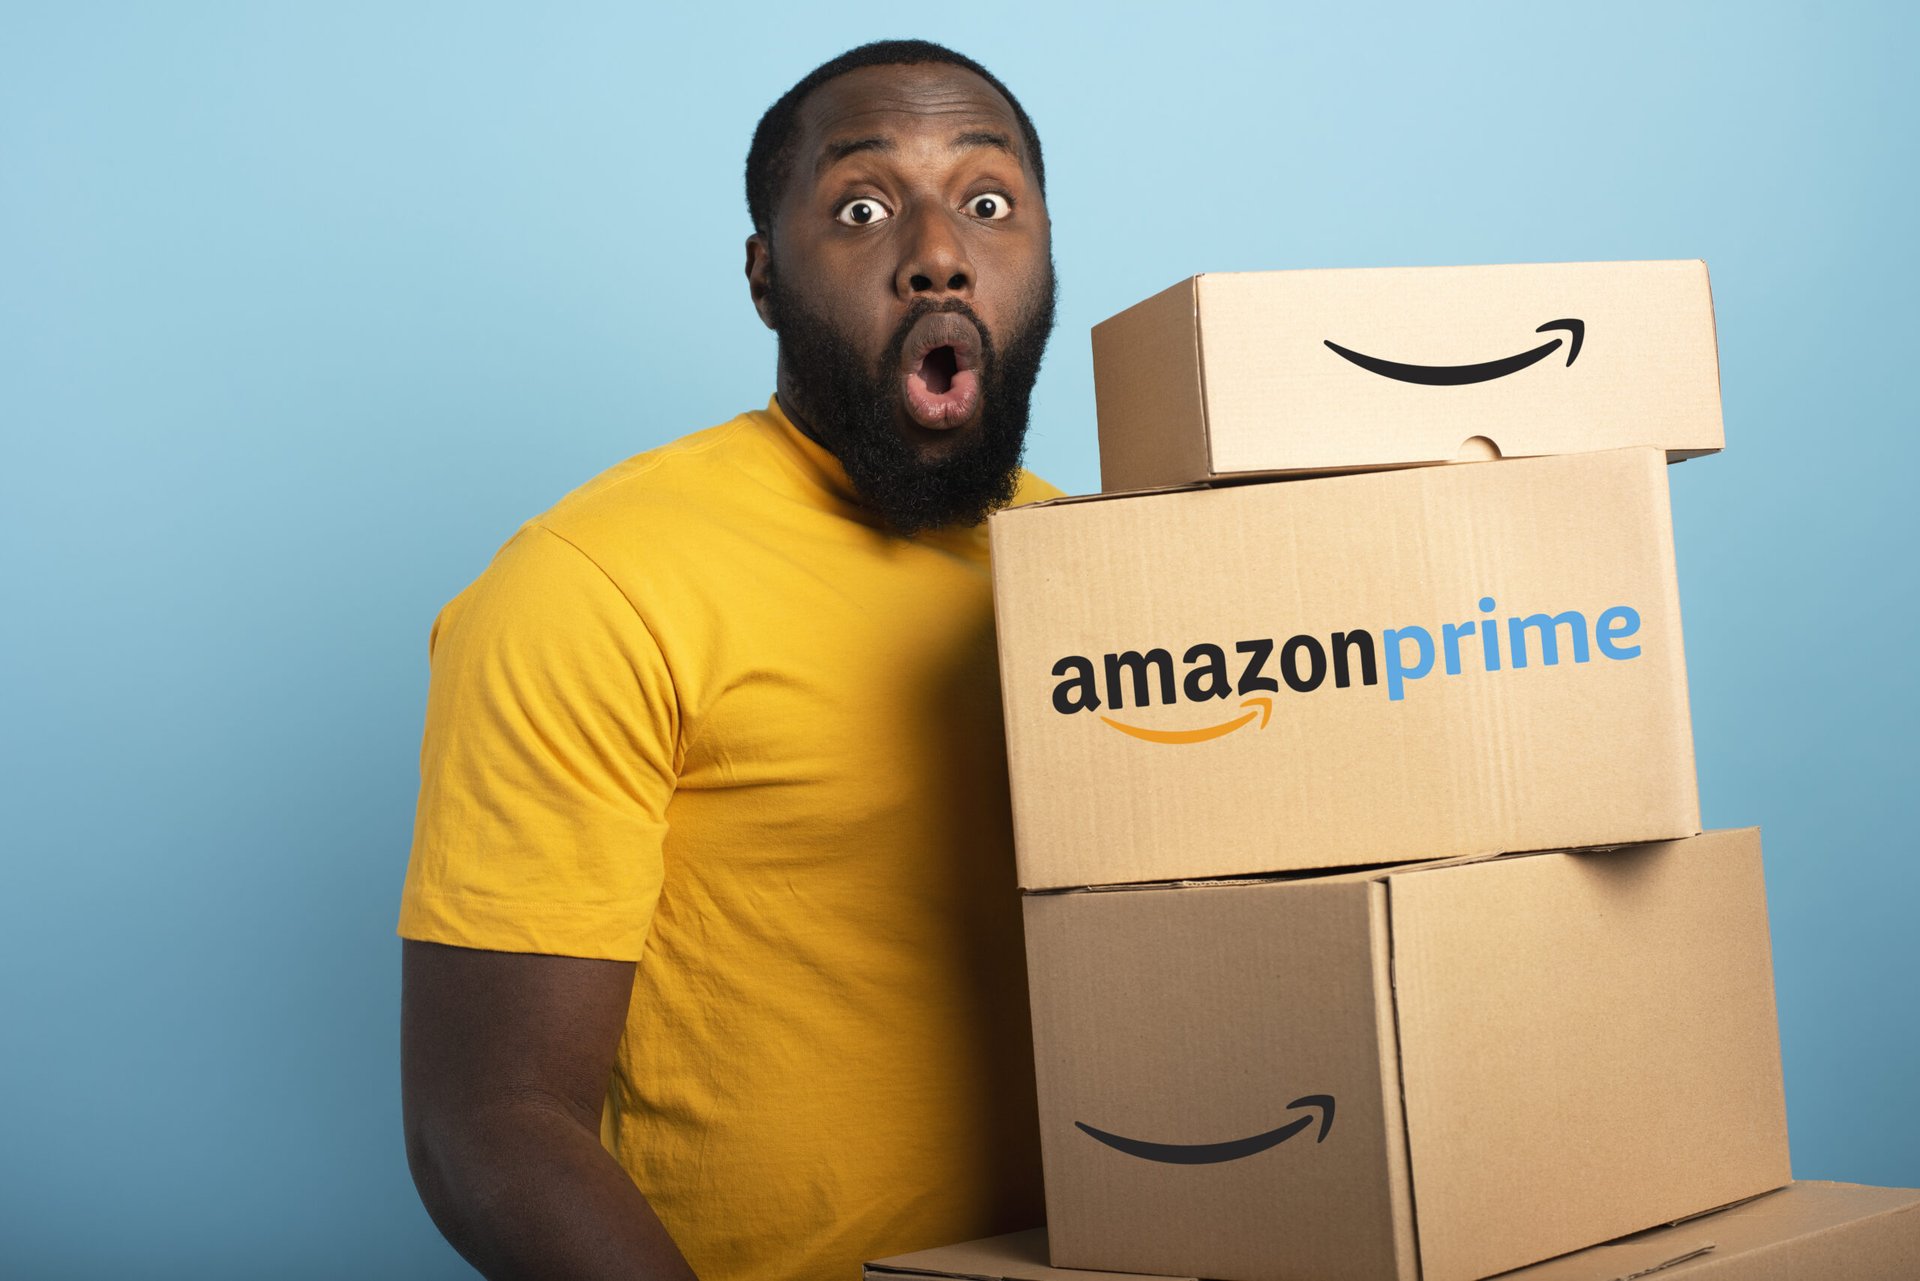 Amazon Prime member holding packages